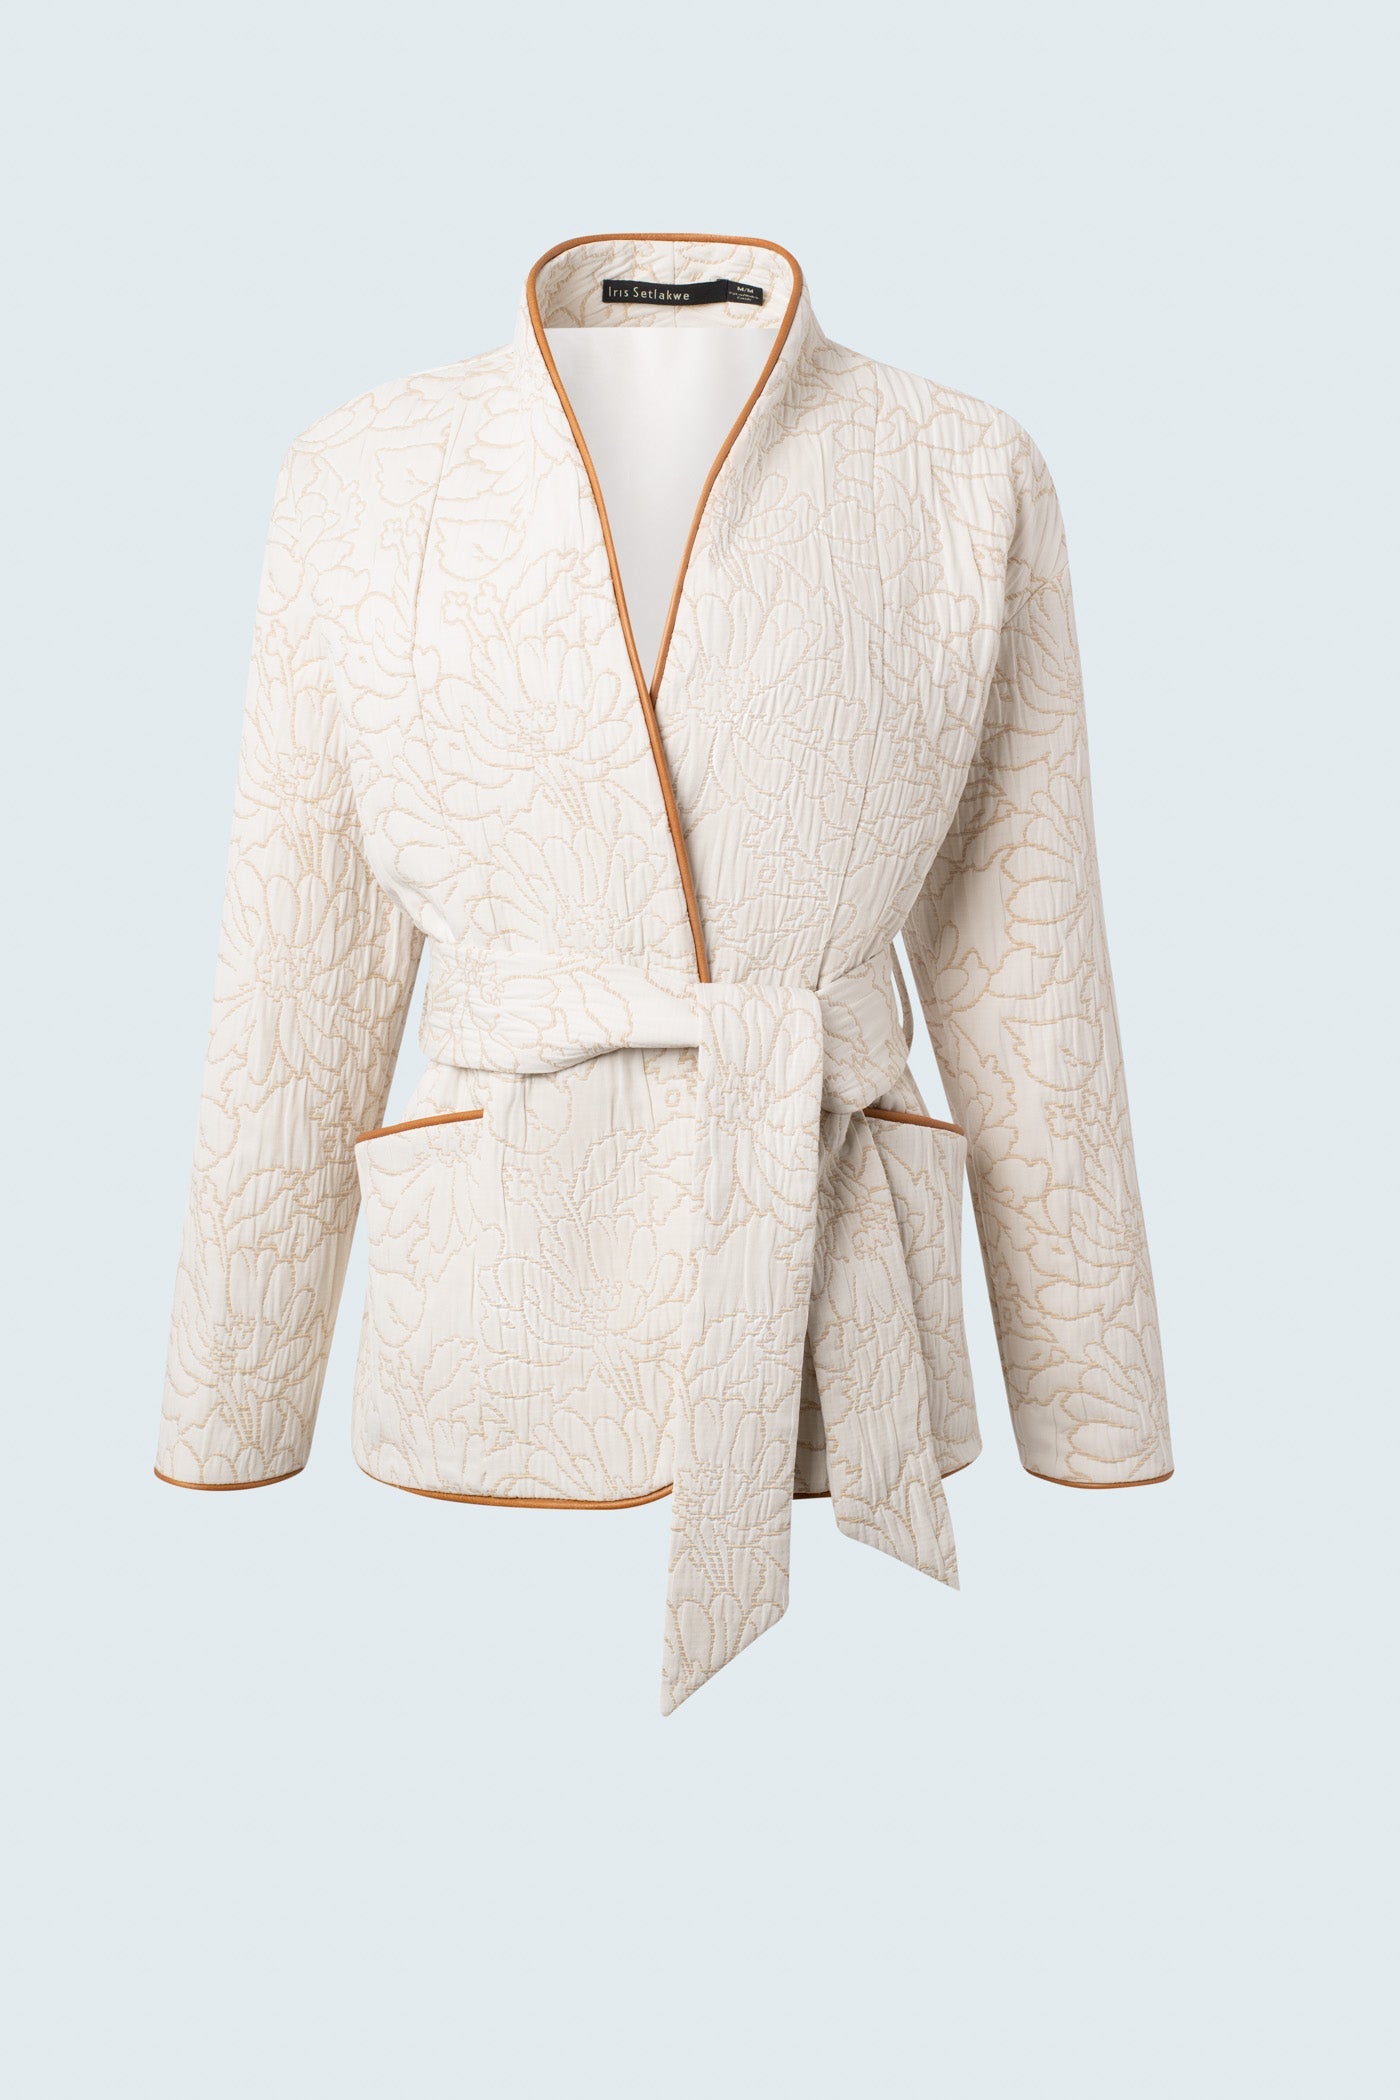 Kimono style quilted jacket with jacquard motif